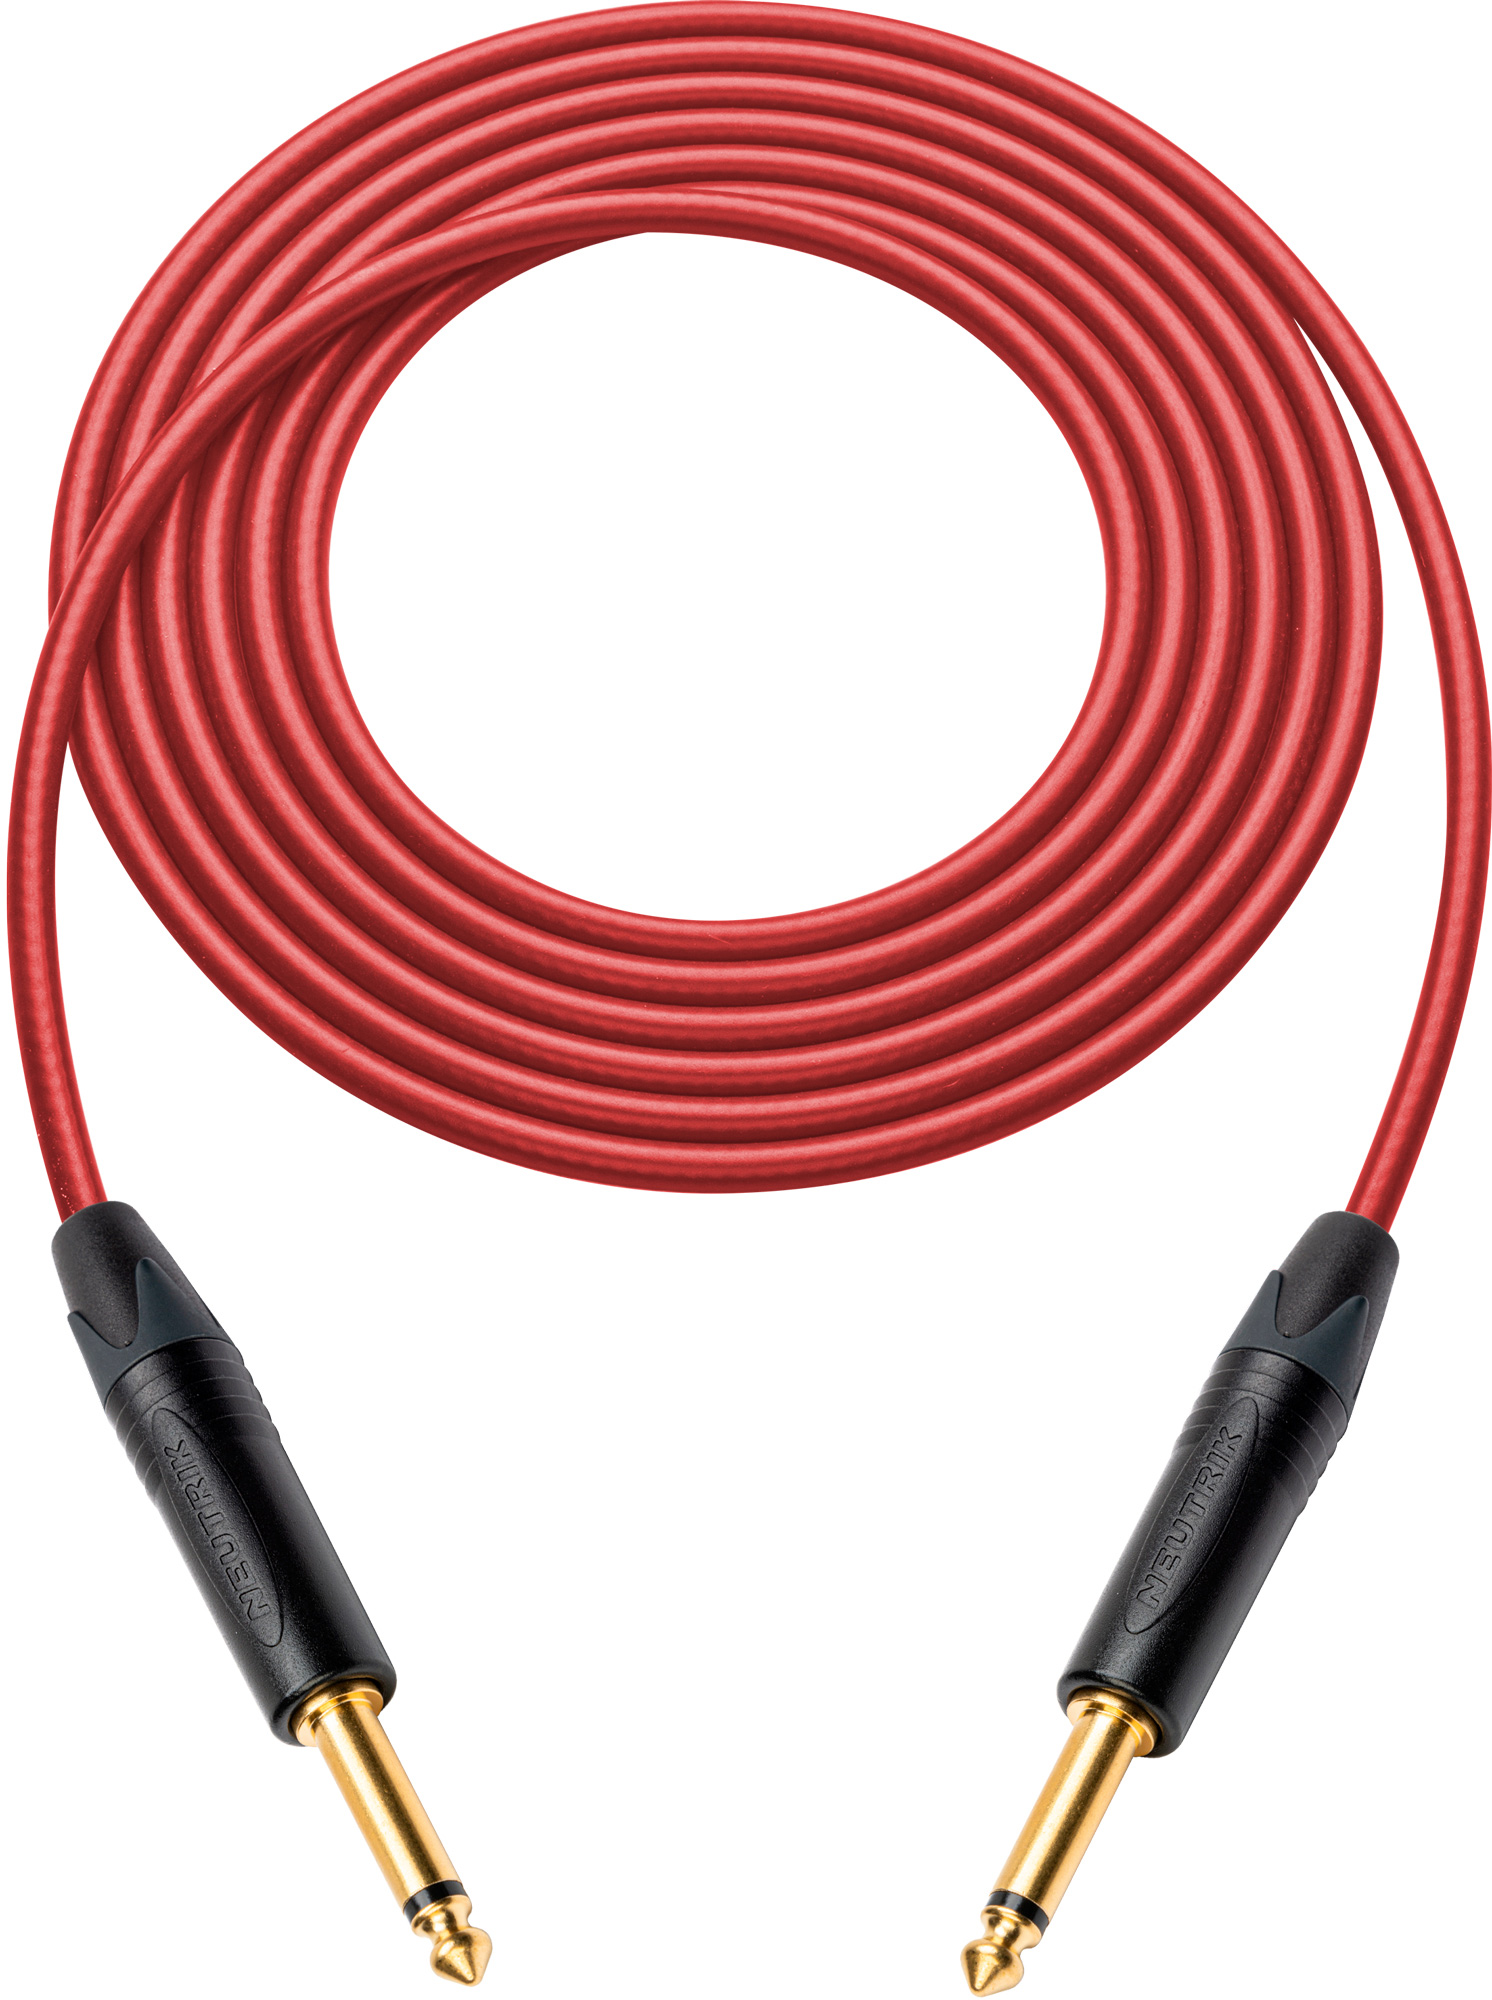 Canare GS-6 Instrument Cable w/Neutrik XS 1/4 Phone Plugs 50 Foot Red